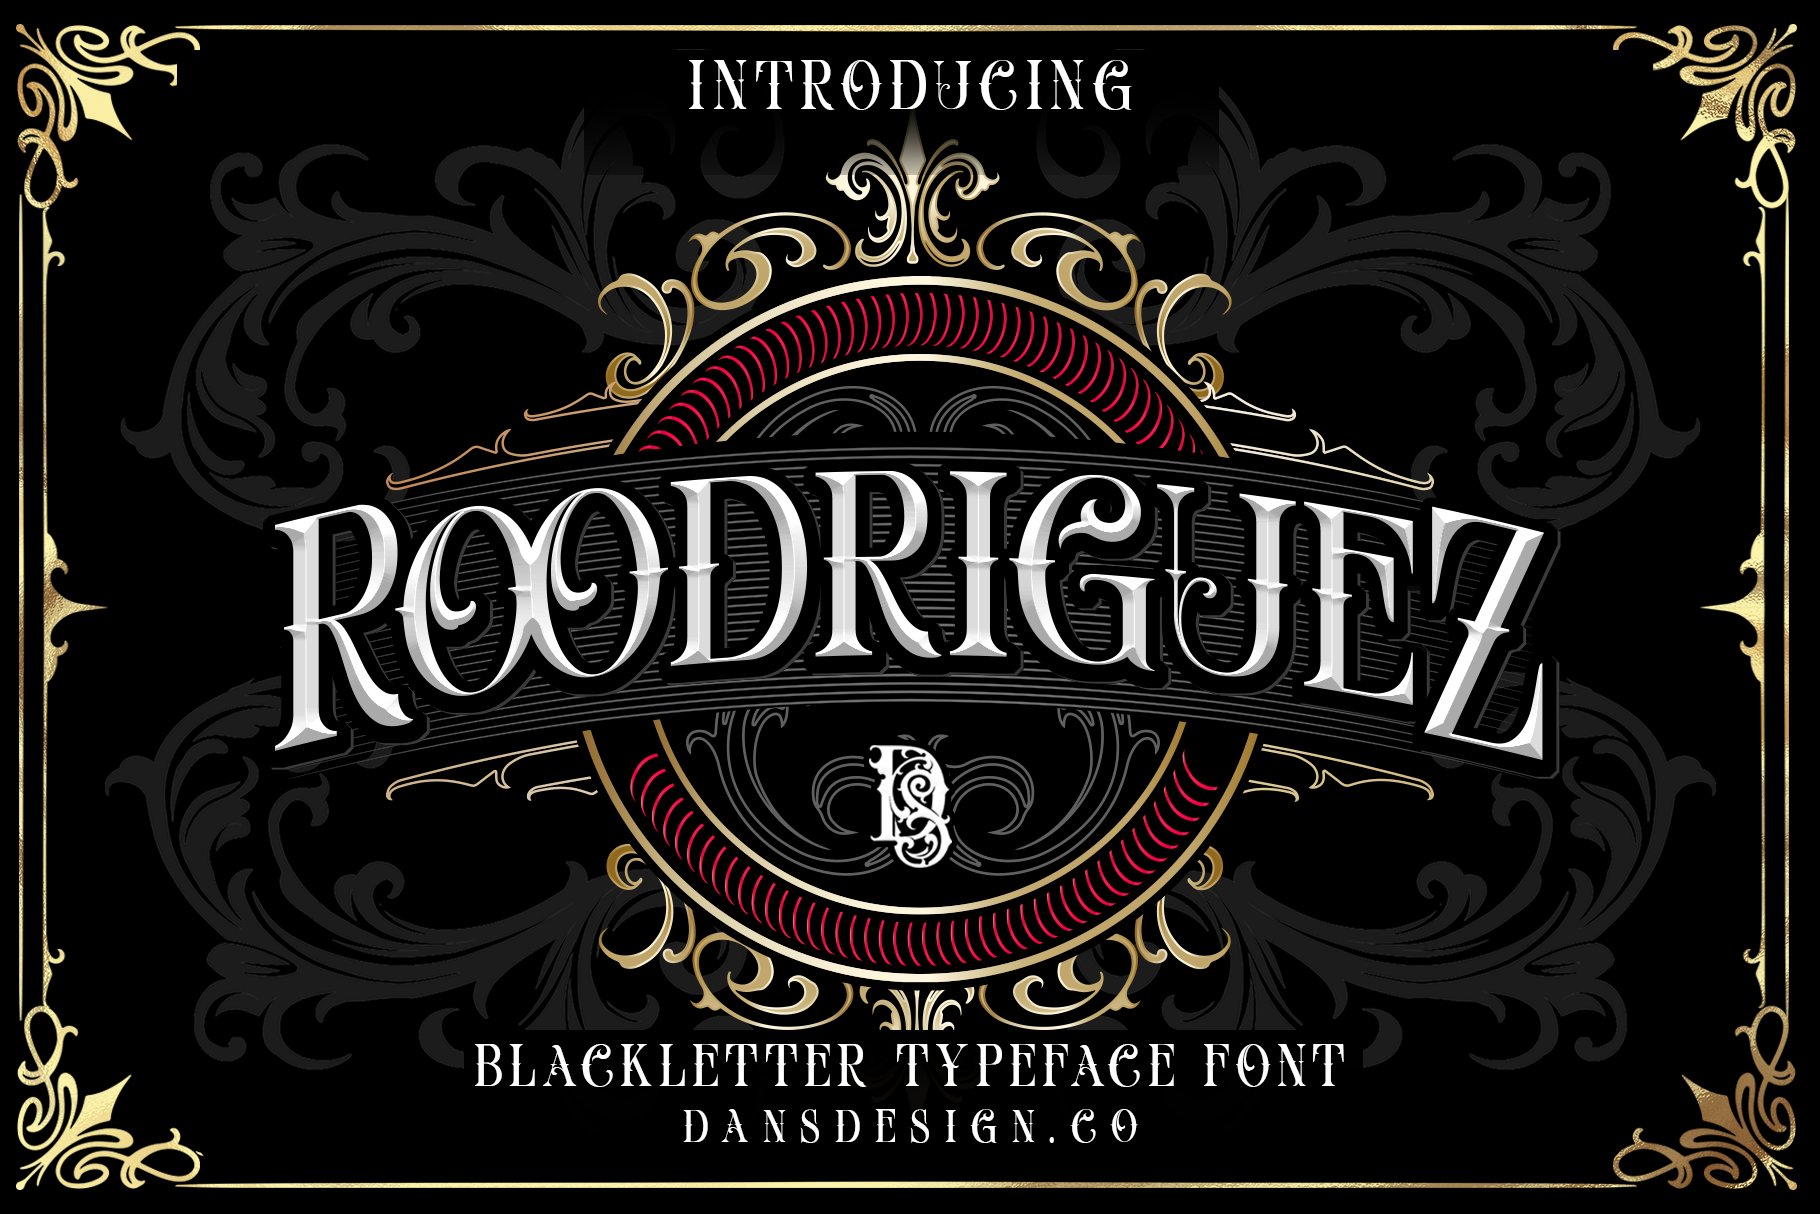 Roodriguez cover image.